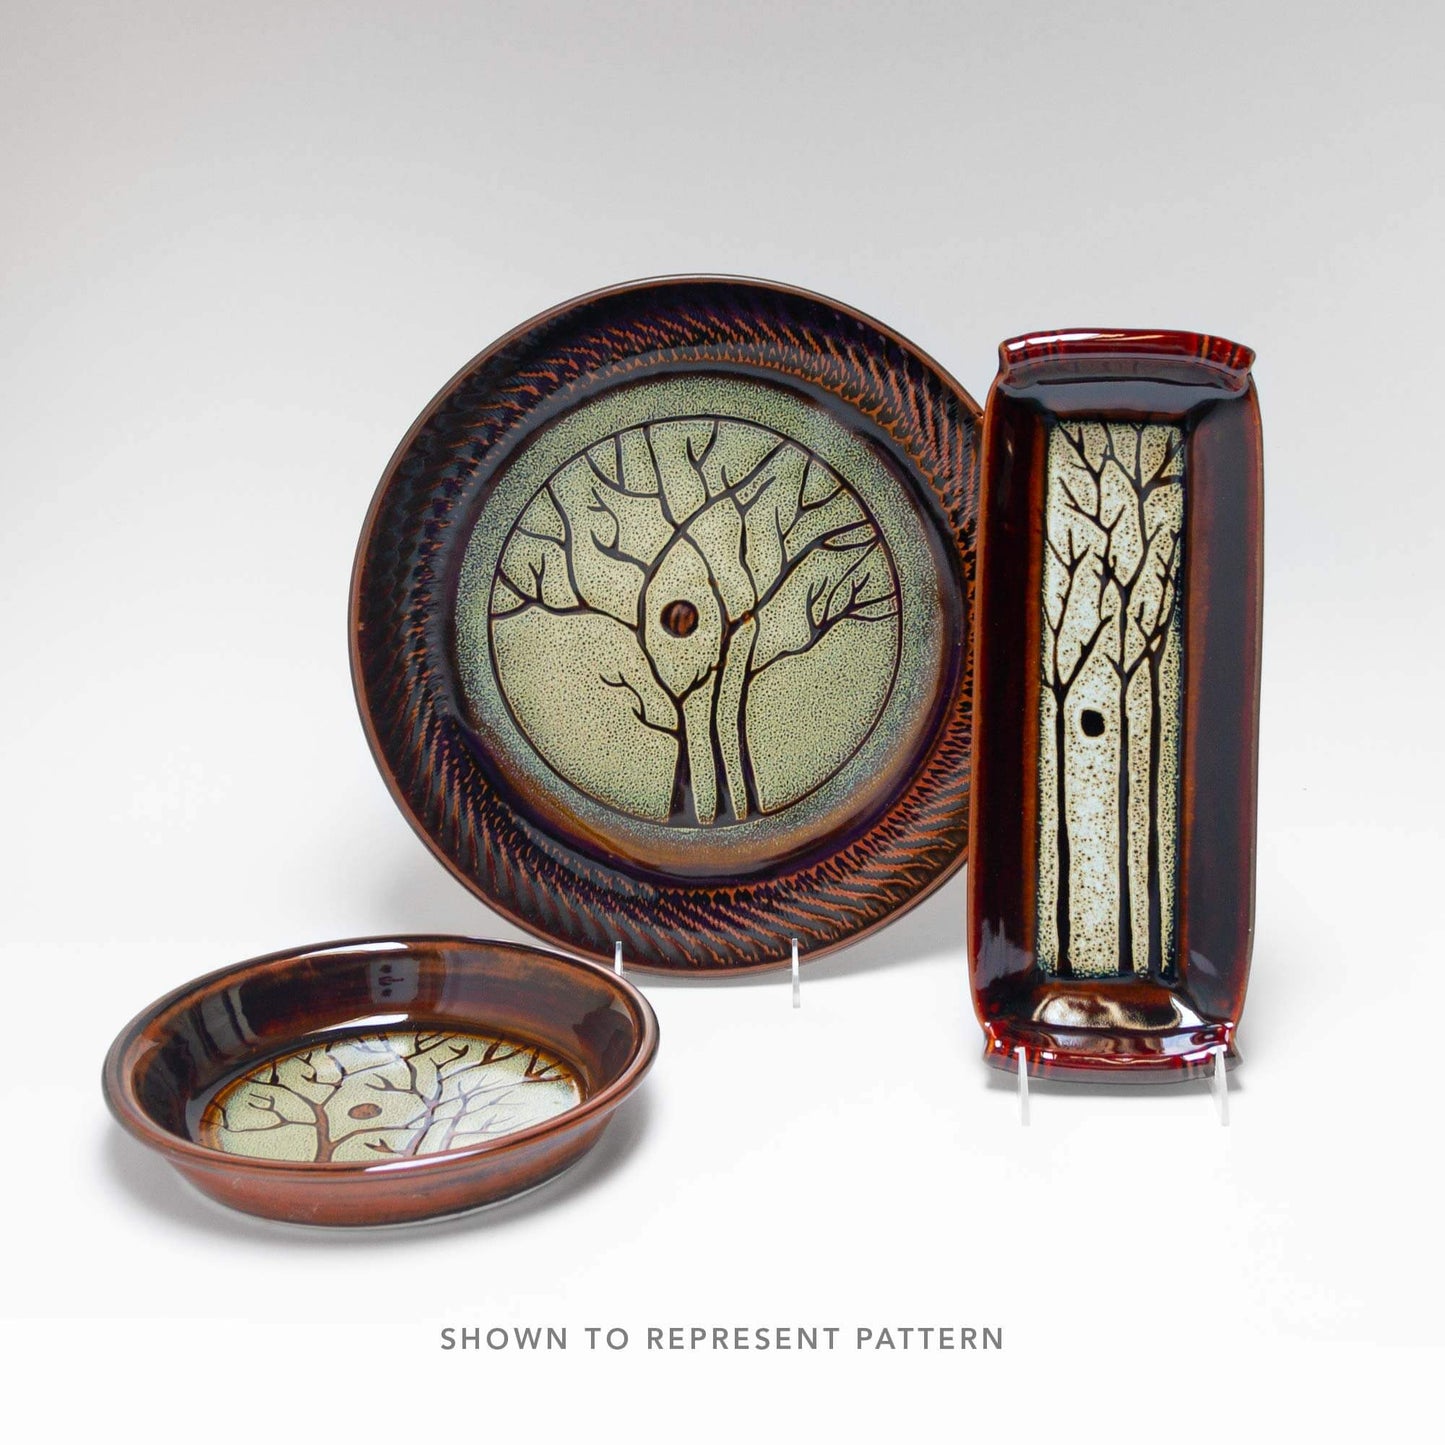 Handmade Pottery Oval Tray in Hamada Tree pattern made by Georgetown Pottery in Maine